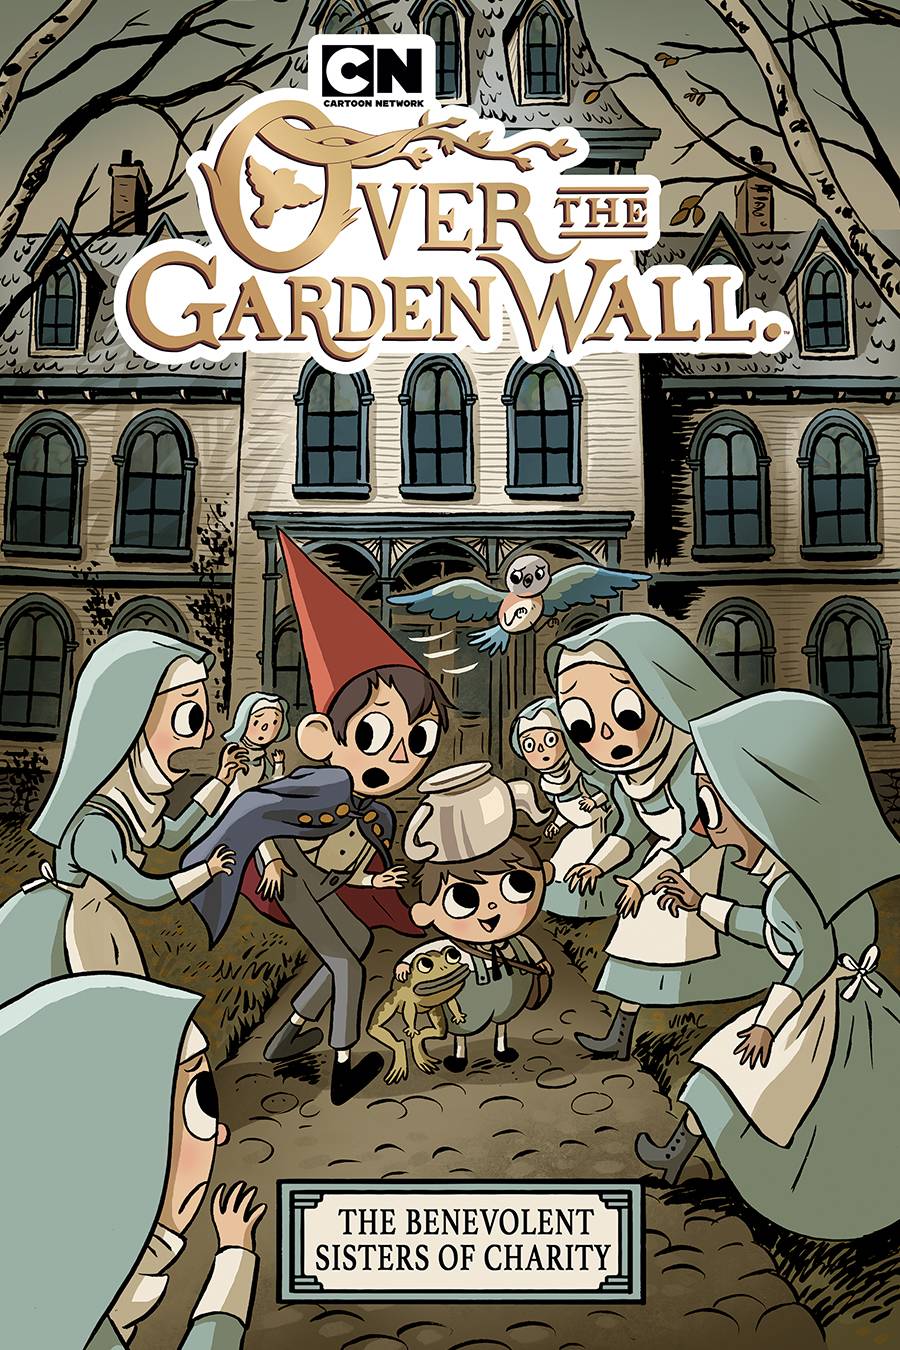 OVER GARDEN WALL SISTERS OF CHARITY ORIGINAL GN